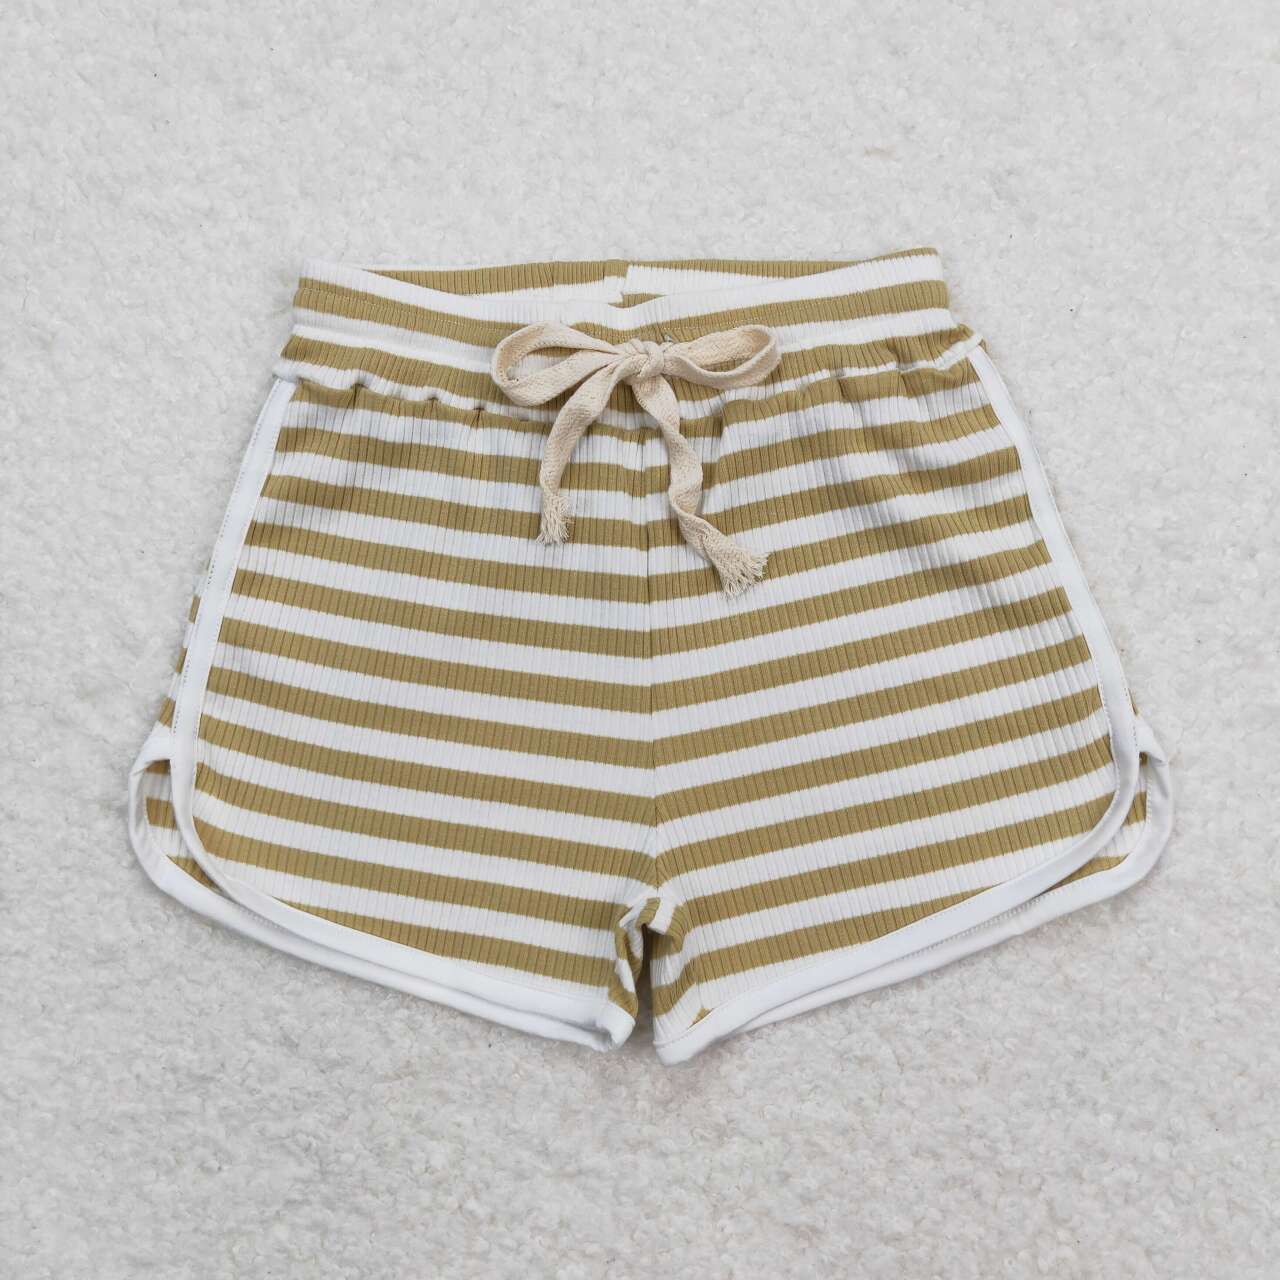 SS0329 Striped brown and green shorts